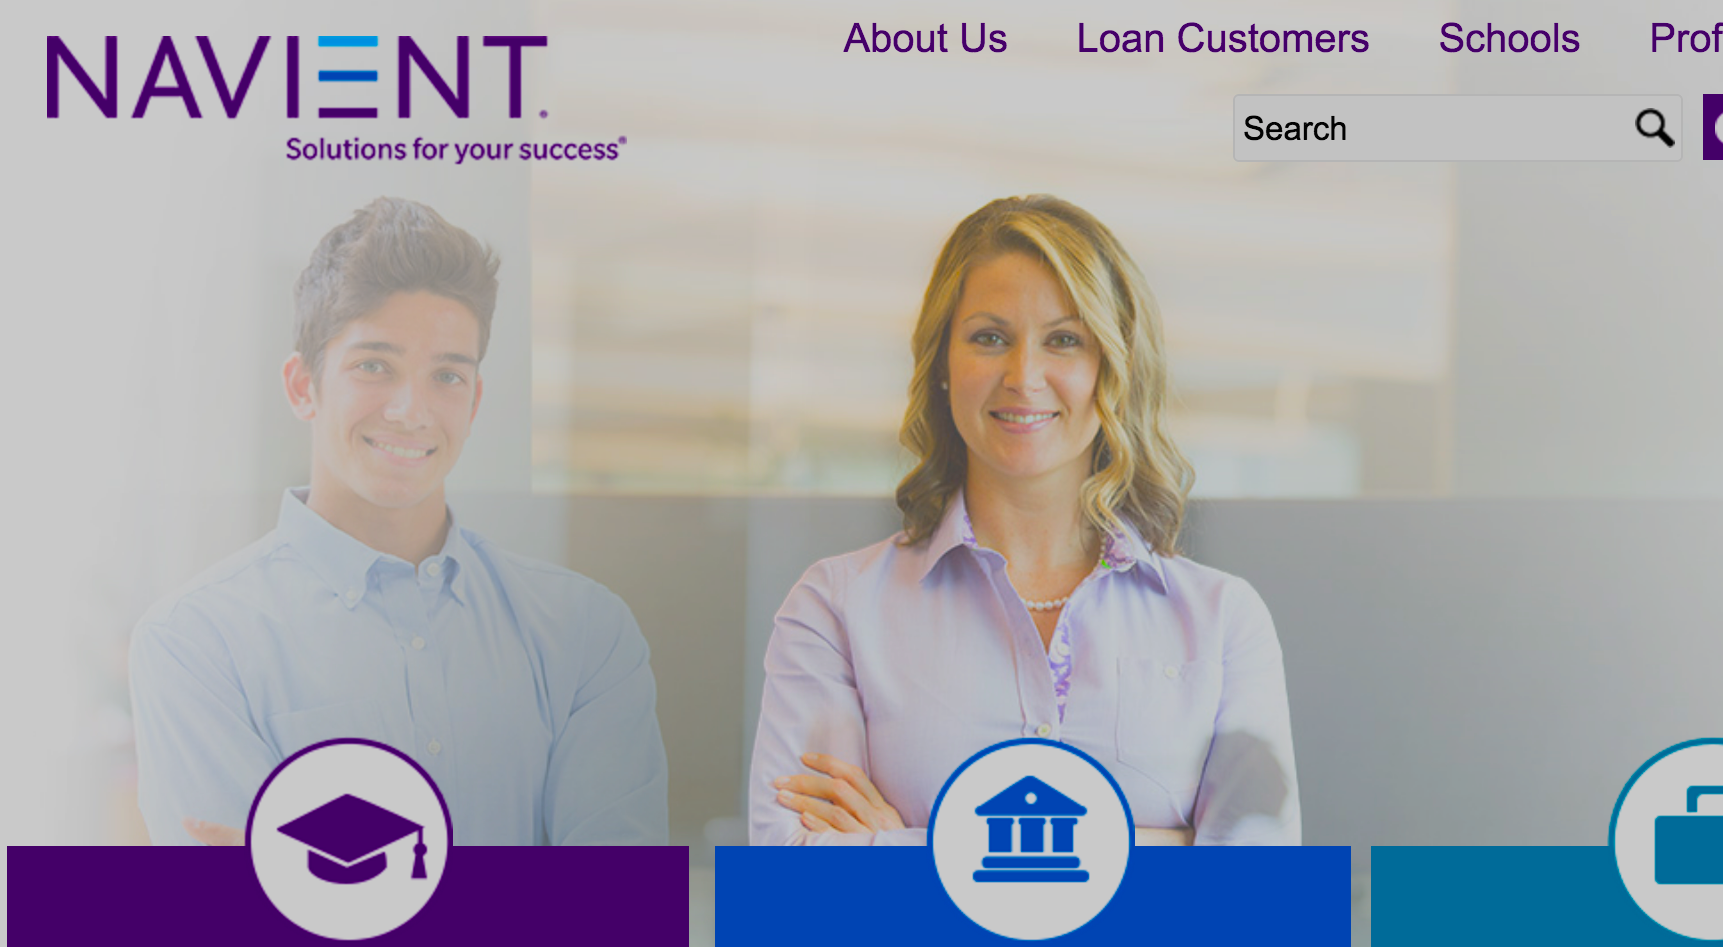 Student Loan Giant Navient Sued By CFPB & Two States Over Alleged Illegal Practices